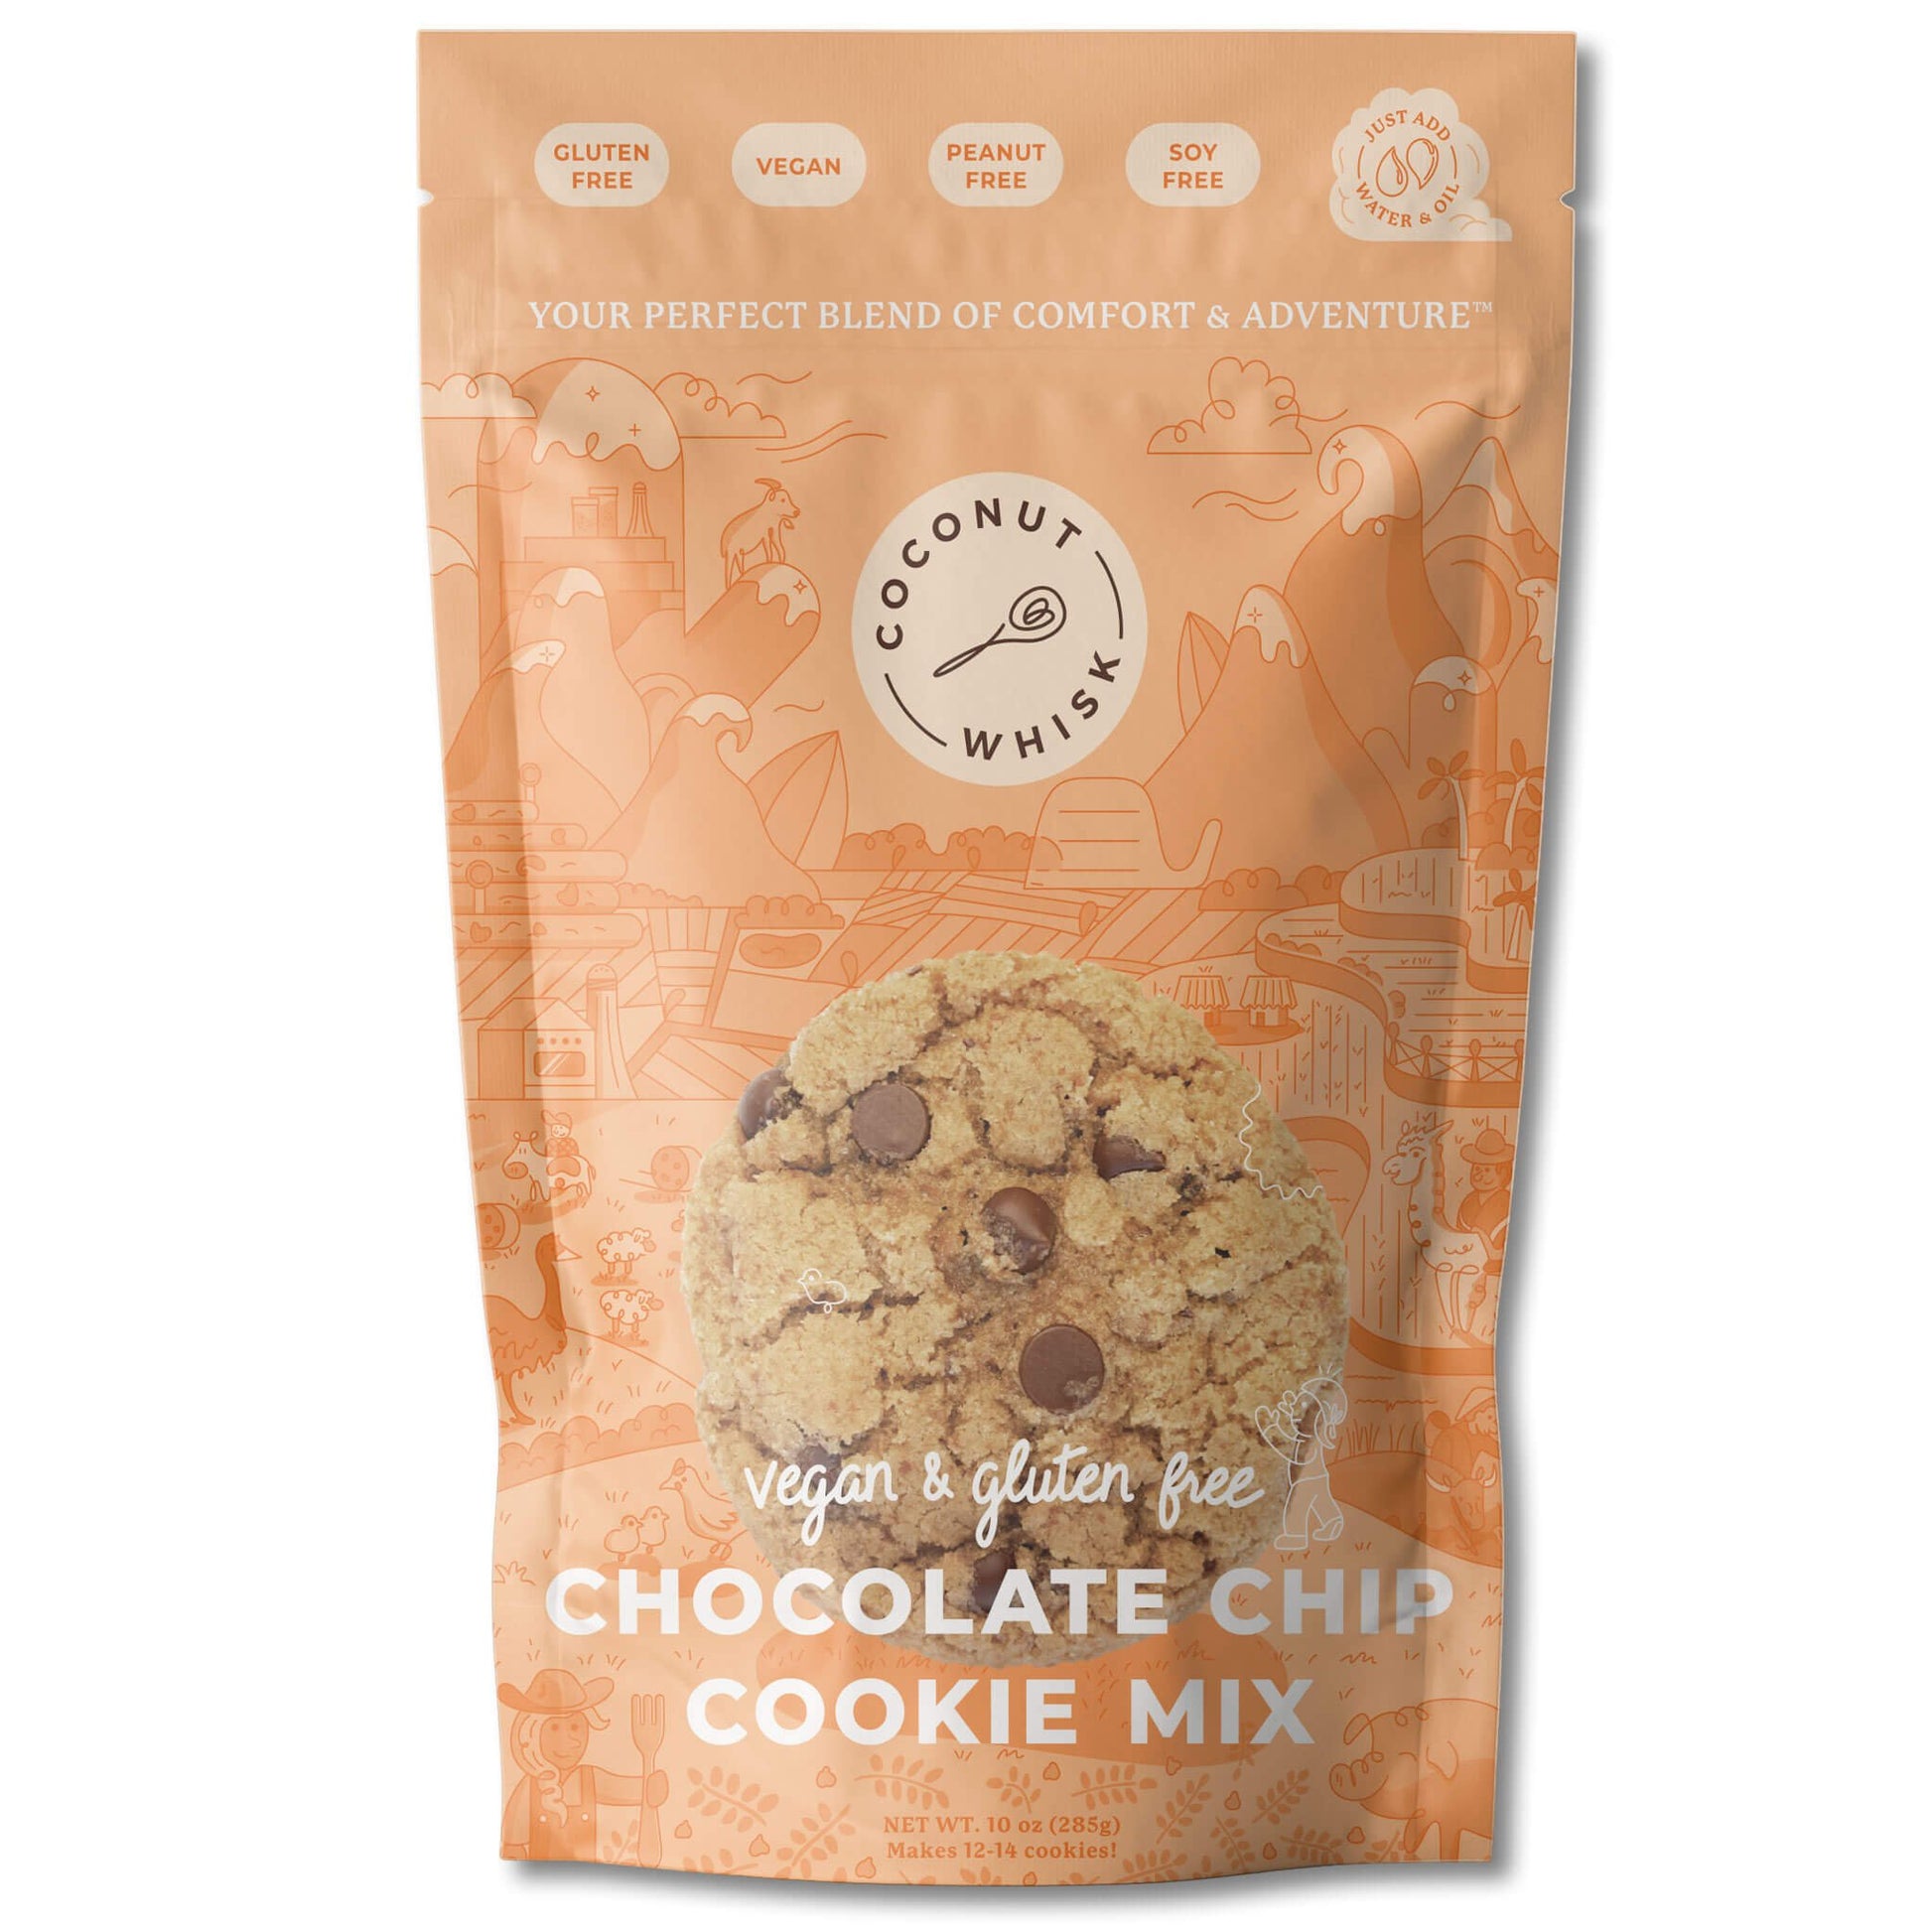 Chocolate Chip Cookie Mix - Coconut Whisk Chocolate Chip Cookie Mix Cookie Mixes